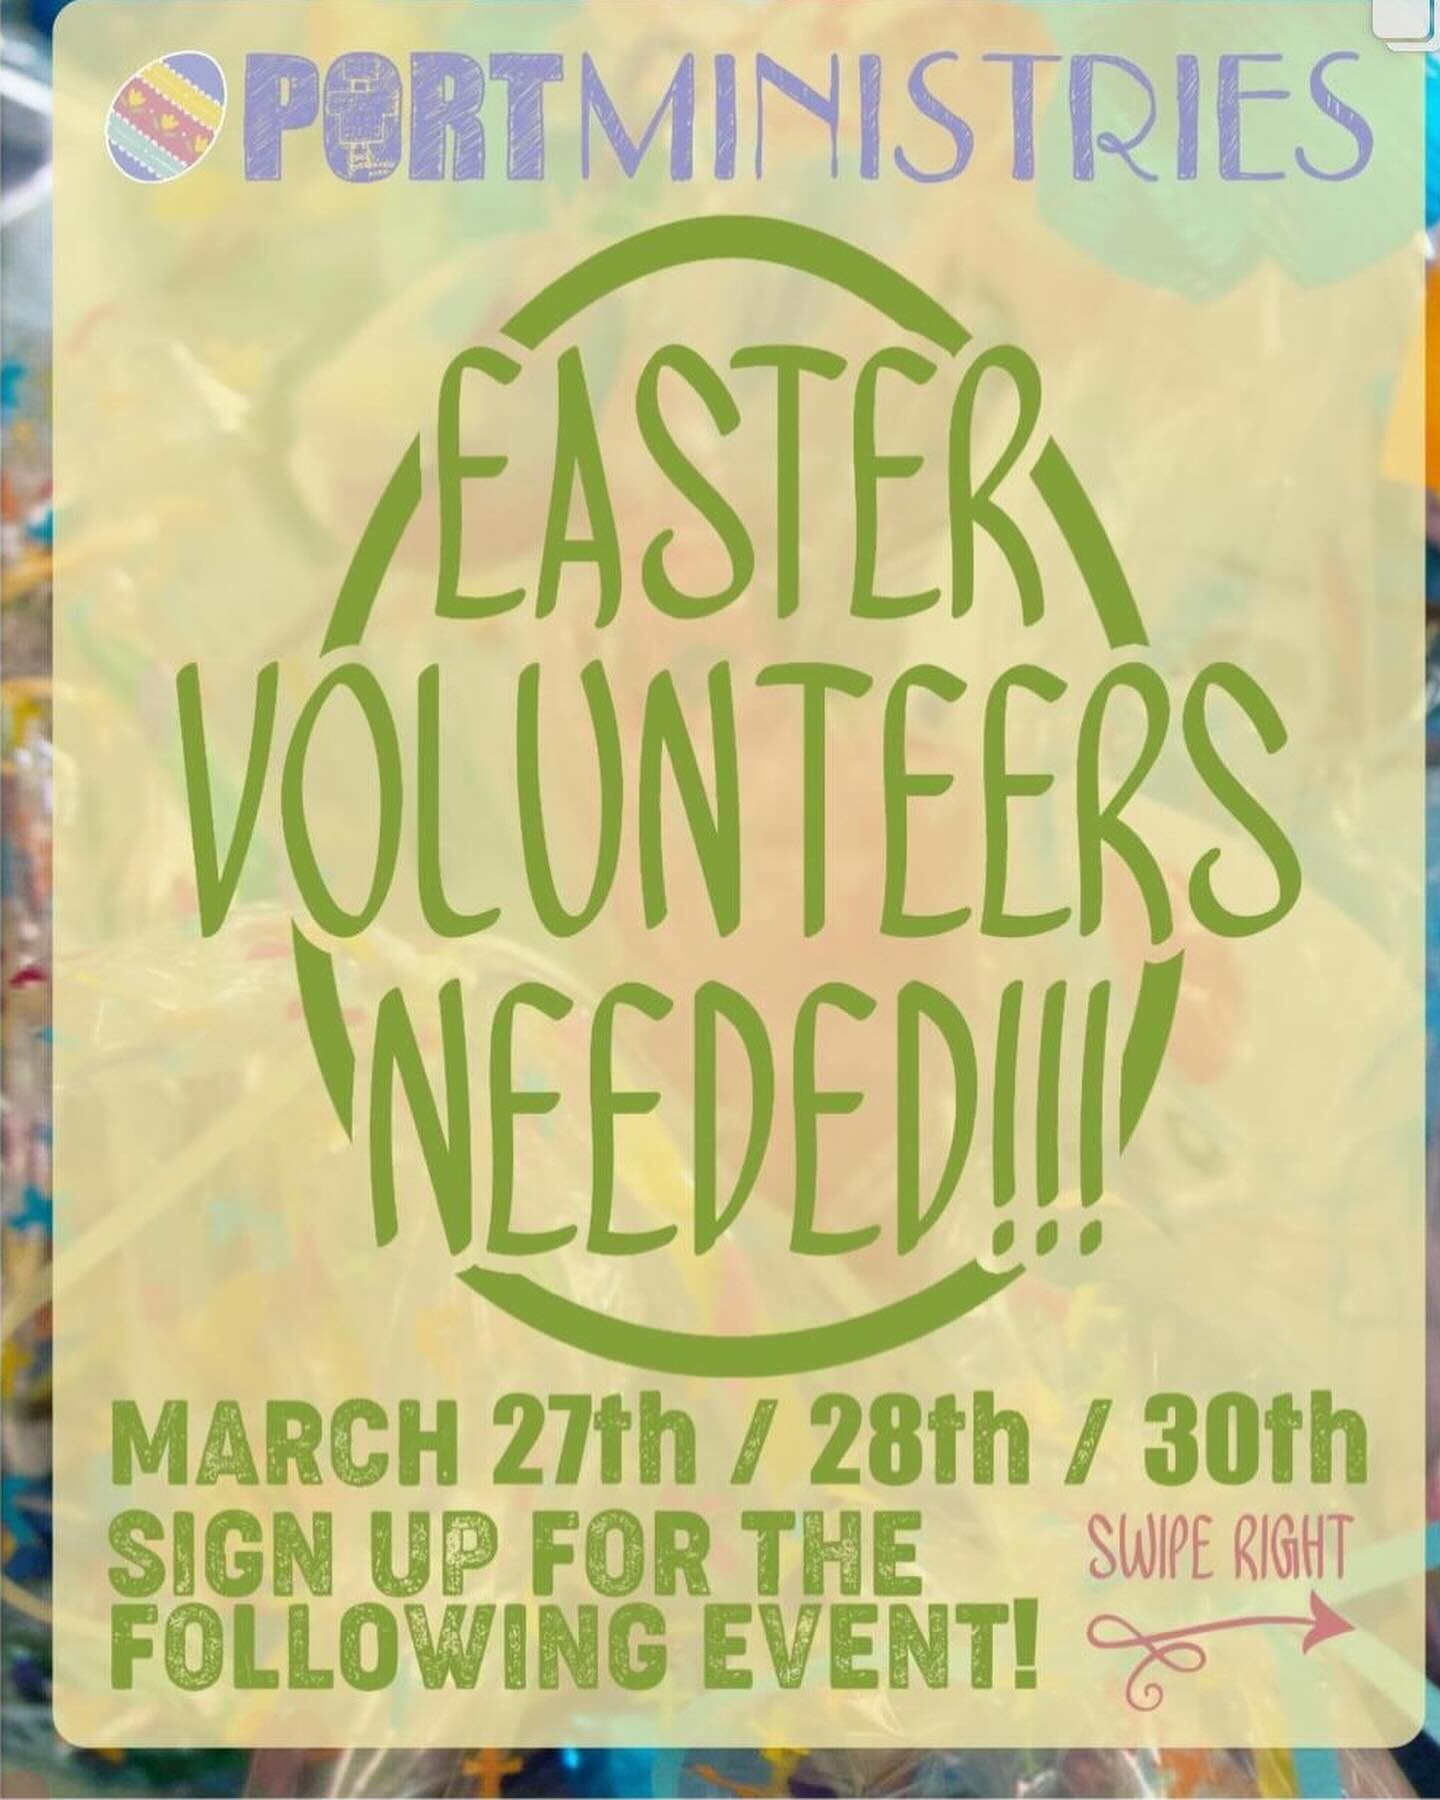 Volunteers needed for @portministries upcoming events: 

Volunteer Opportunities Include:
* Egg Boiling and Dyeing: Set up and assist with egg decorating stations.
* Lunch Service: Help serve lunch to kids participating in the activities.
* Photograp